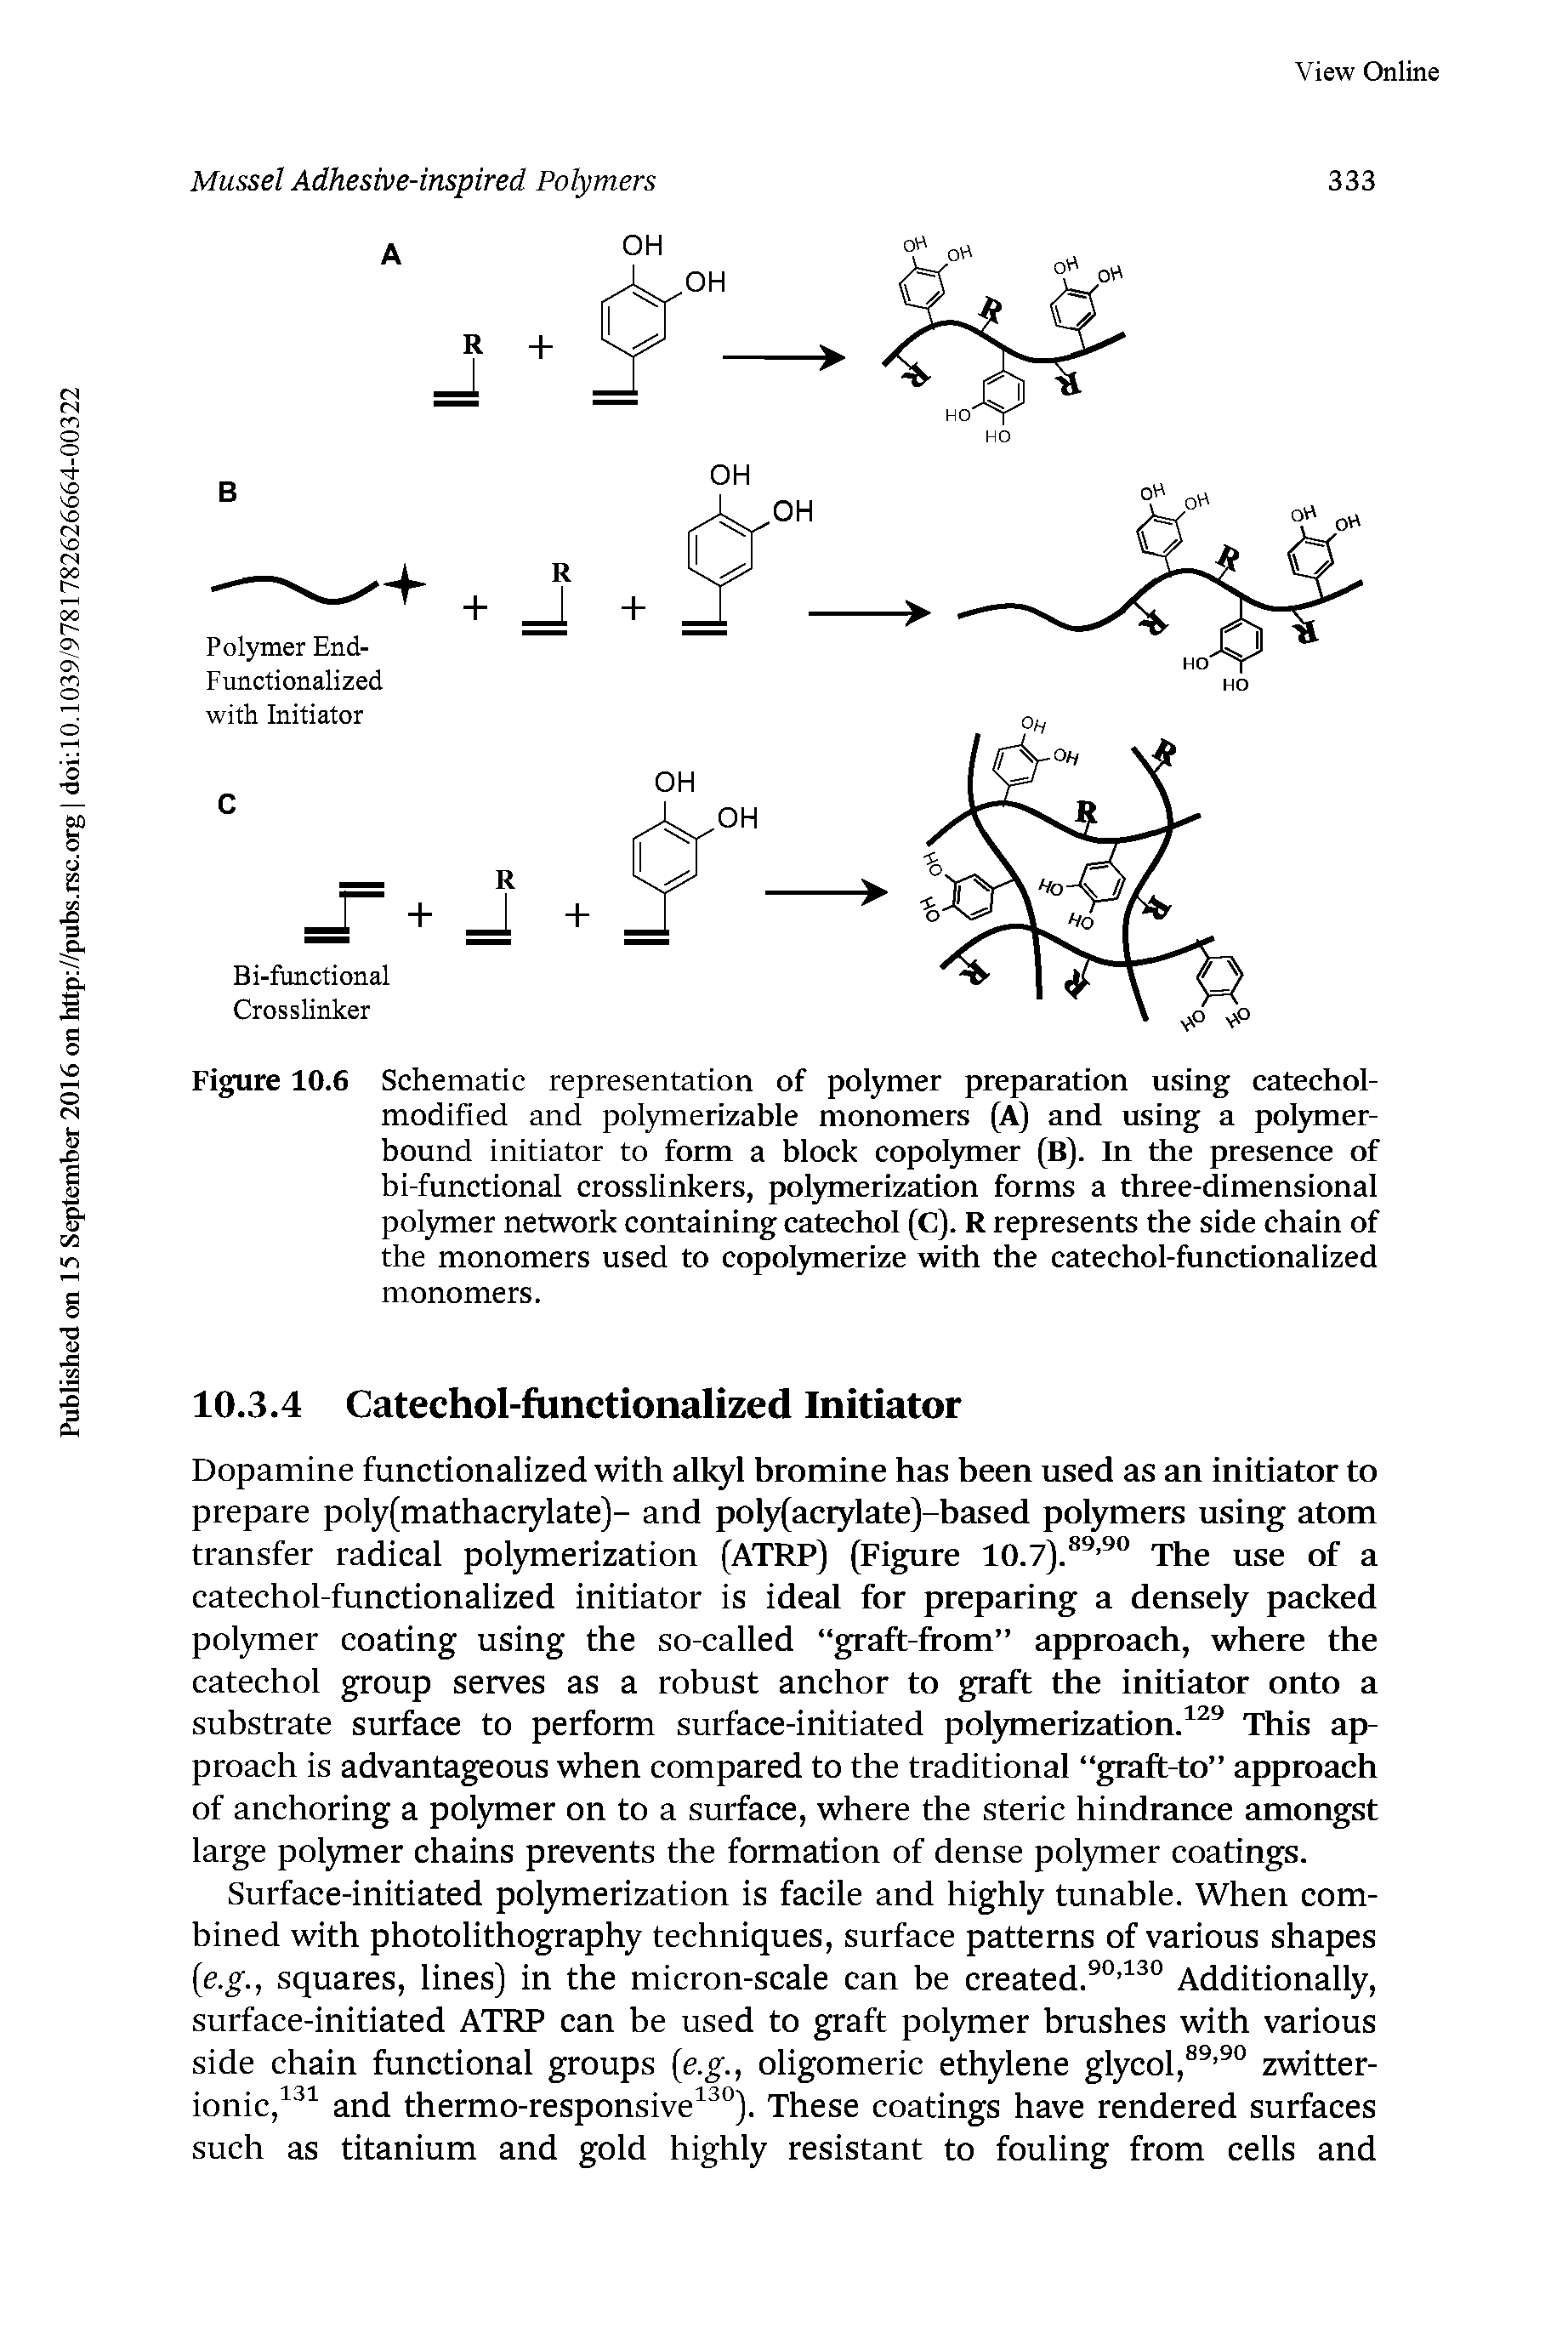 Figure 10.6 Schematic representation of polymer preparation using catechol-modified and polymerizable monomers (A) and using a polymer-bound initiator to form a block copotymer (B). In the presence of bi-functional crosslinkers, potymerization forms a three-dimensional pol3mier network containing catechol (C). R represents the side chain of the monomers used to copotymerize with the catechol-functionalized monomers.